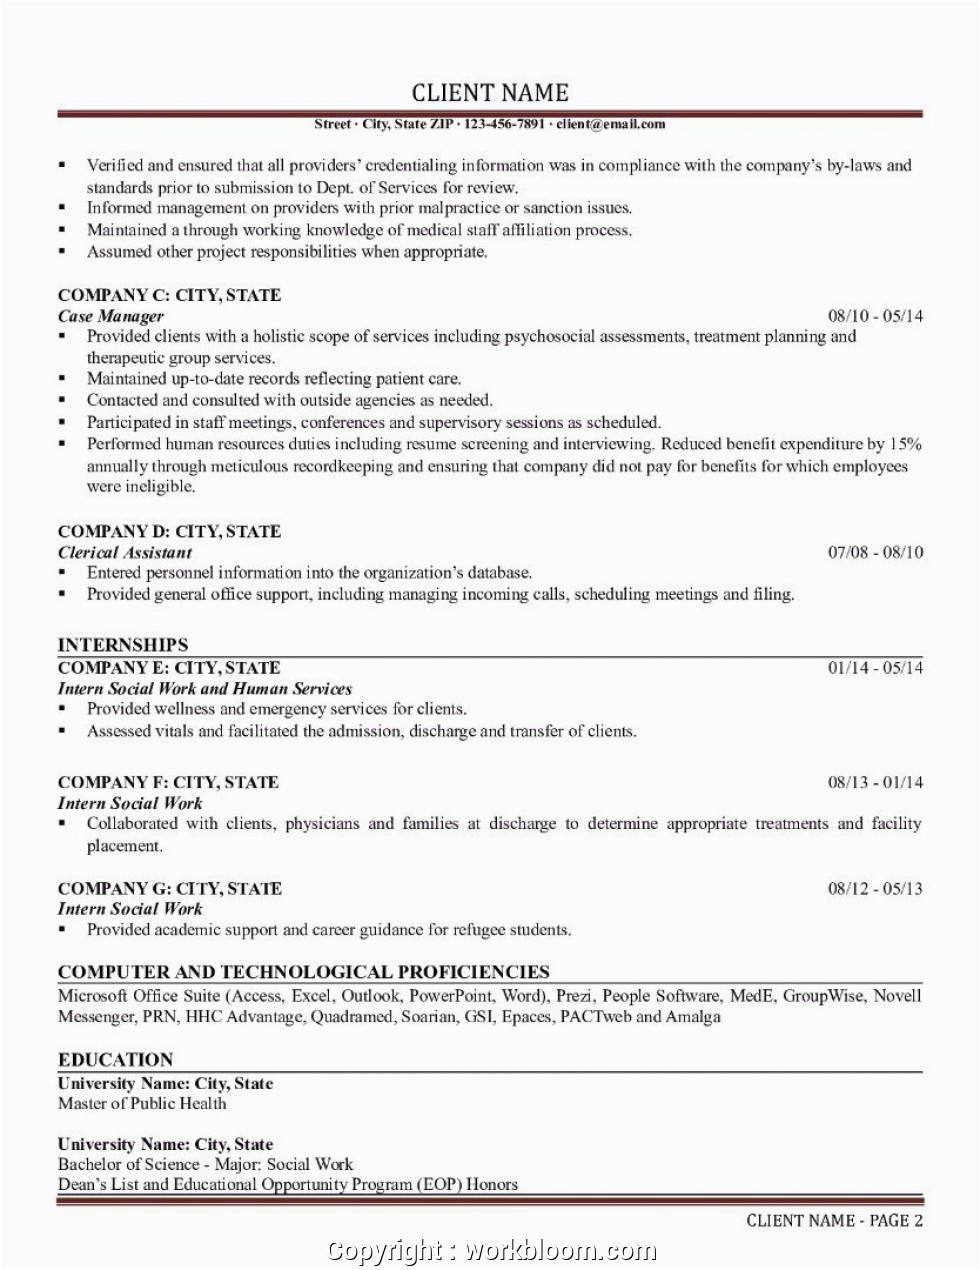 Sample Resume for Human Services Position Unique Human Services Resume Human Services Resume Gfortran